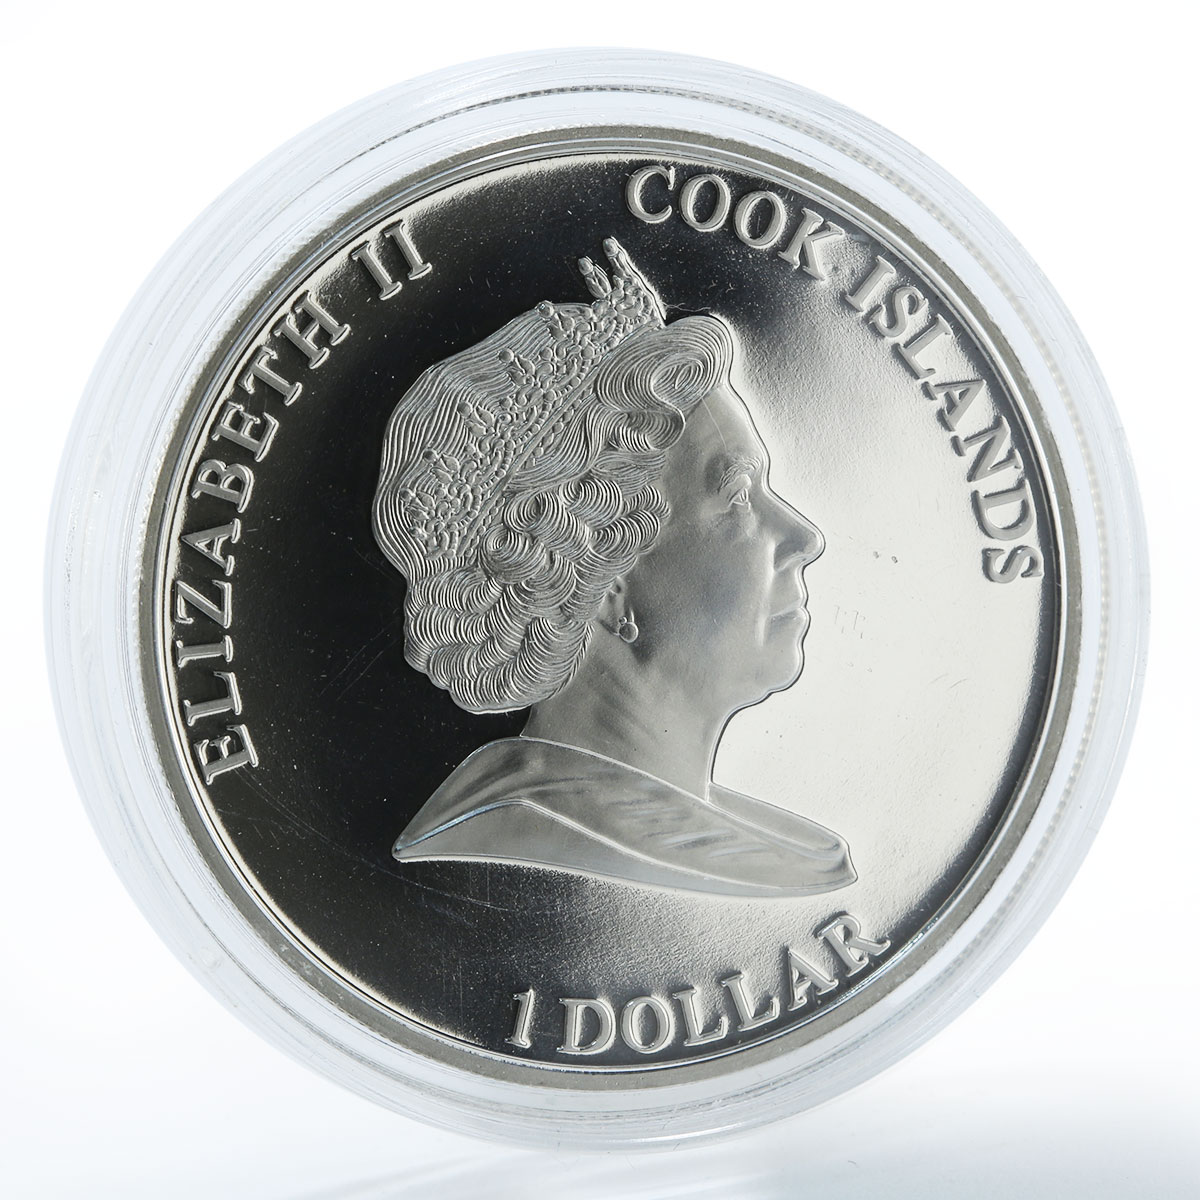 Cook Islands 1 dollar HMB Endeavour James Cook 1728-1779 silver Proof coin 2009